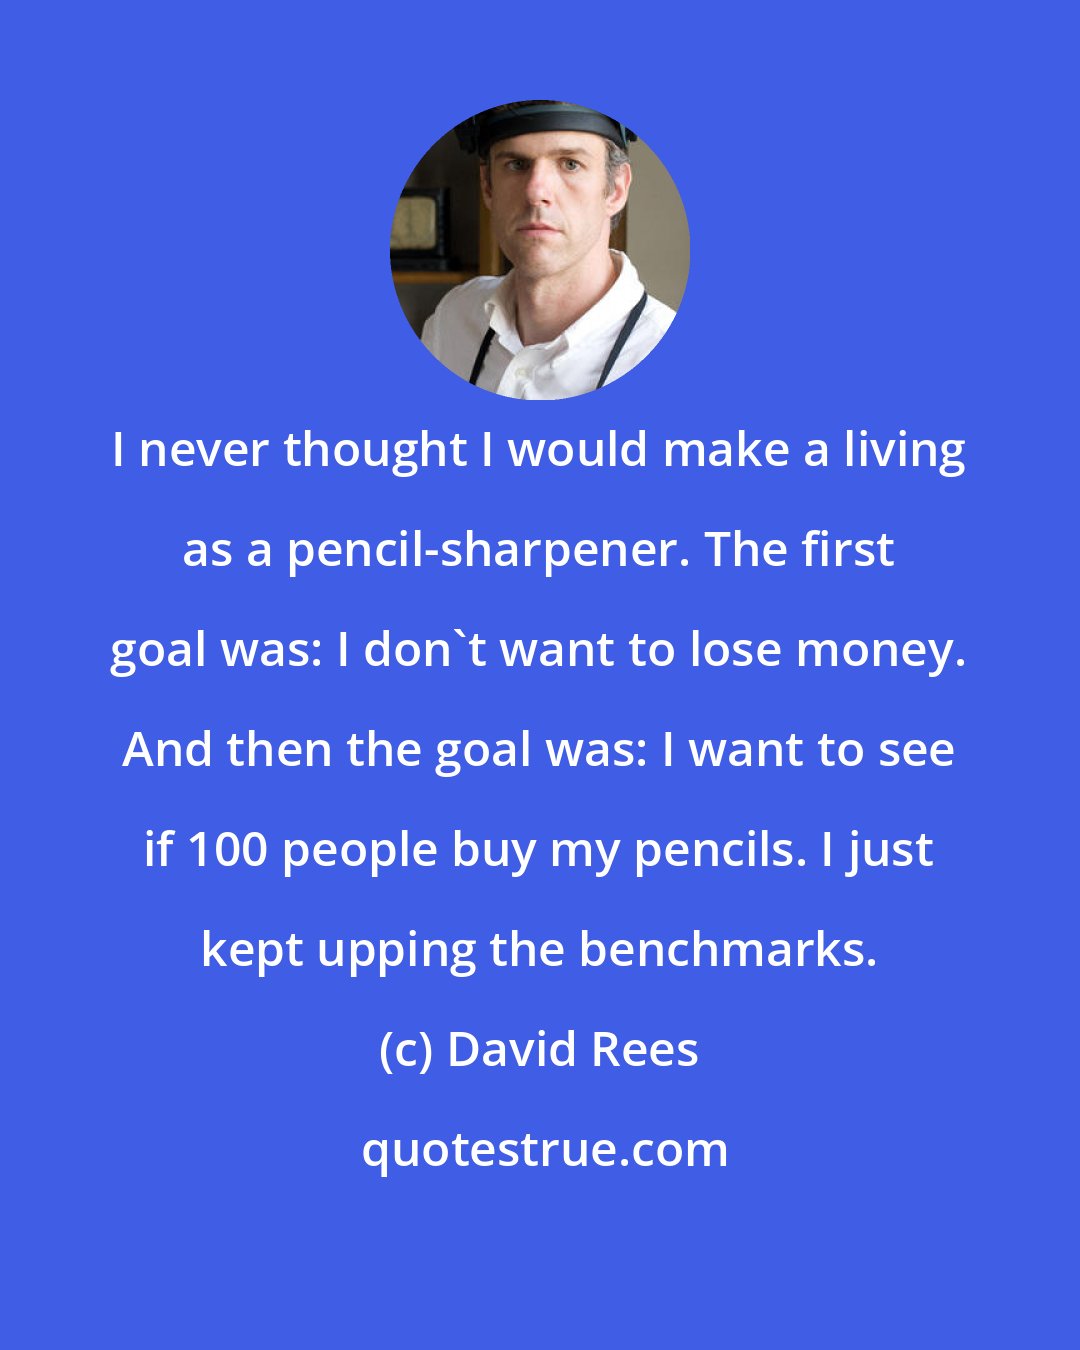 David Rees: I never thought I would make a living as a pencil-sharpener. The first goal was: I don't want to lose money. And then the goal was: I want to see if 100 people buy my pencils. I just kept upping the benchmarks.